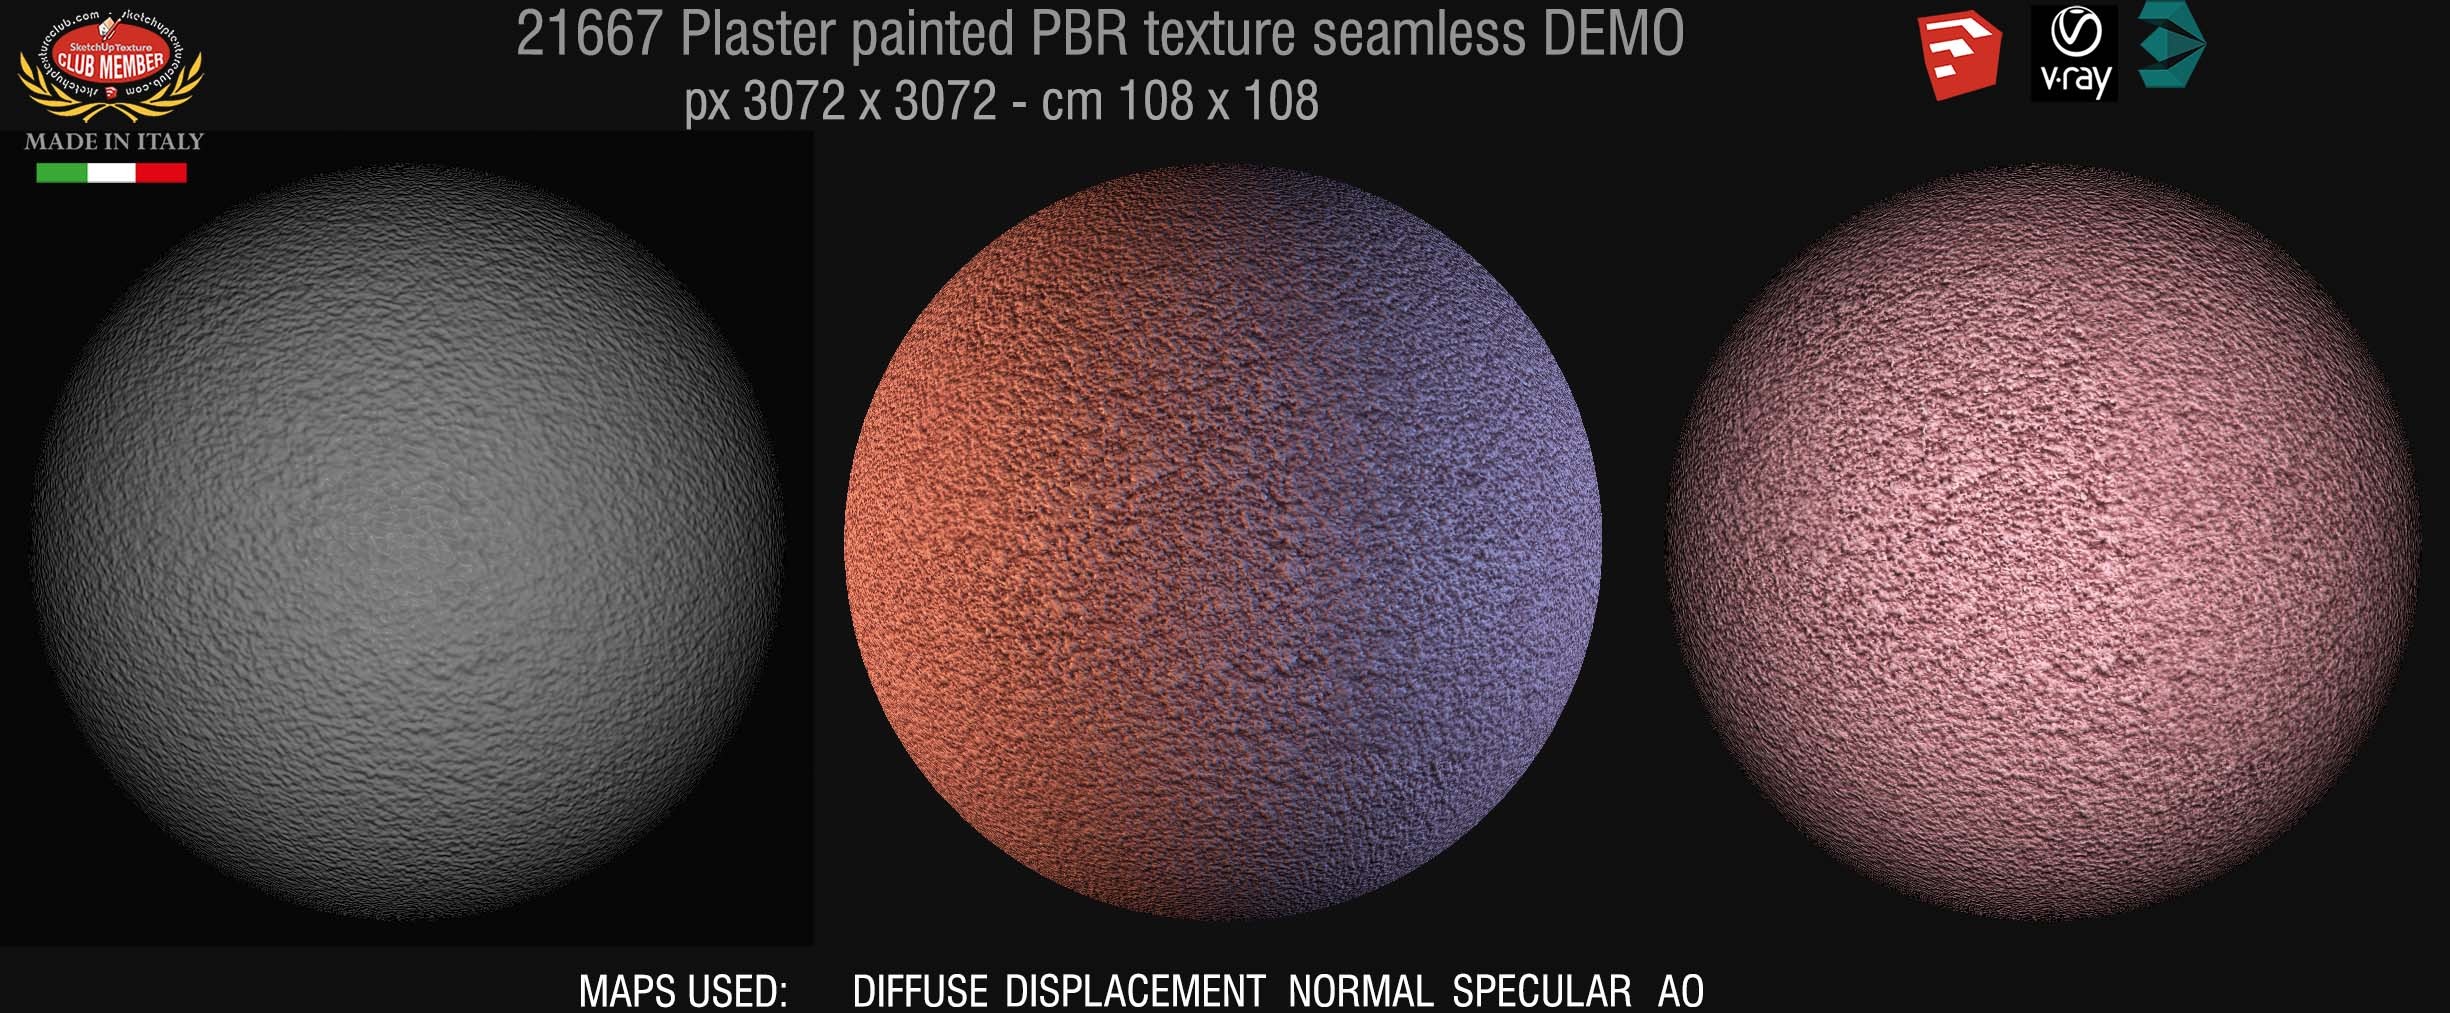 21667 plaster painted PBR texture seamless DEMO